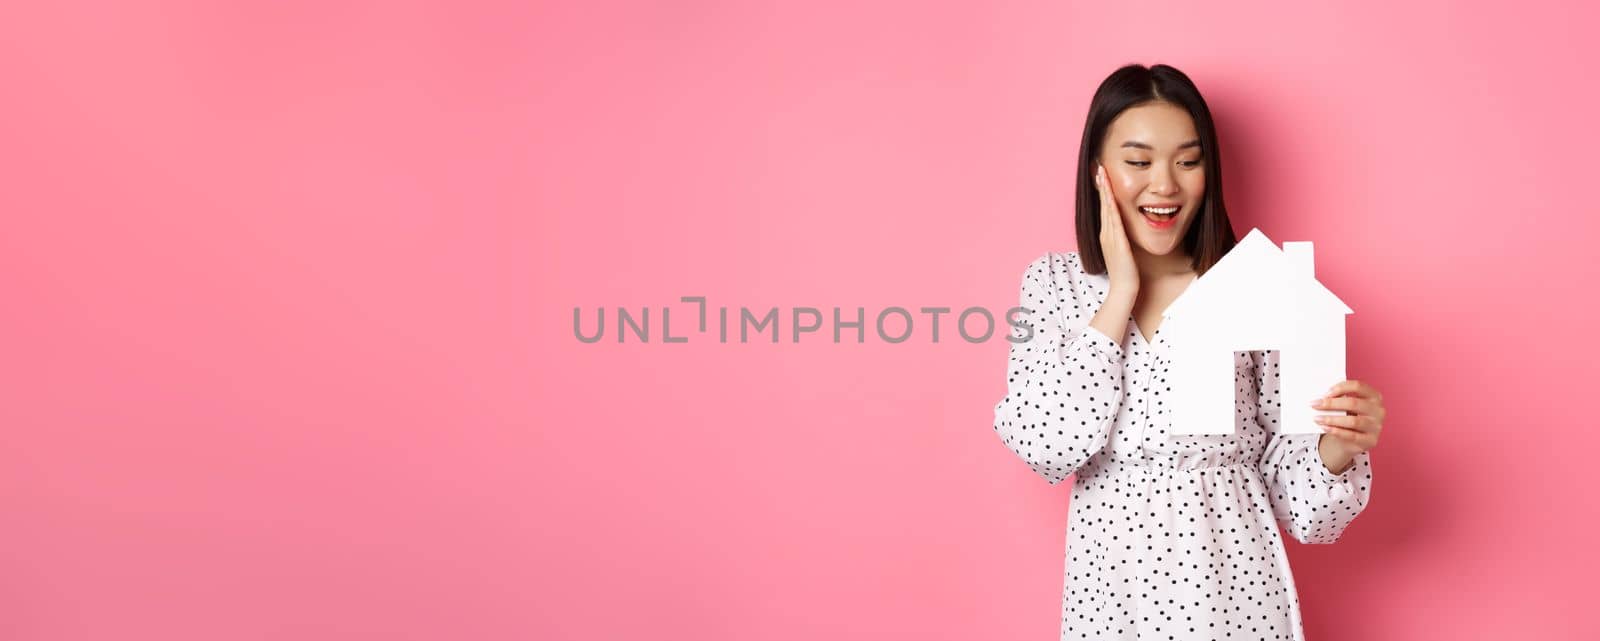 Real estate. Cute asian woman searching for apartment, looking happy at paper house model, standing against pink background.